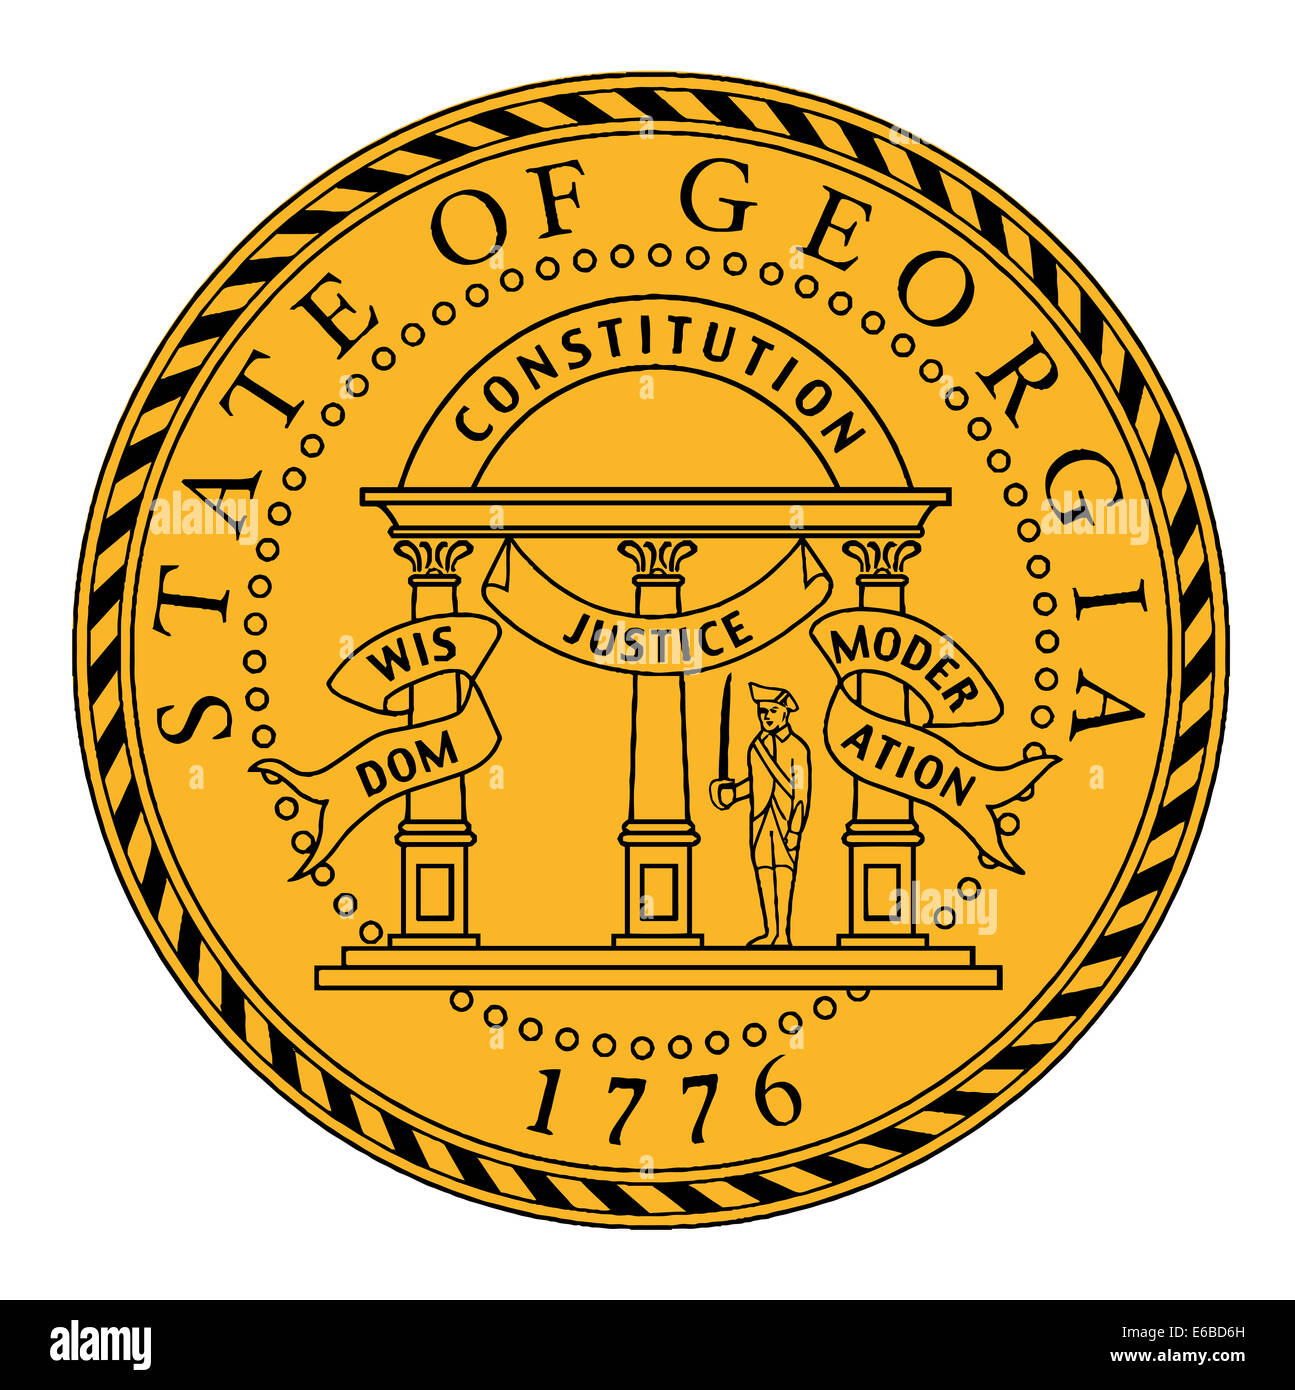 The State Seal of Georgia on a white background Stock Photo